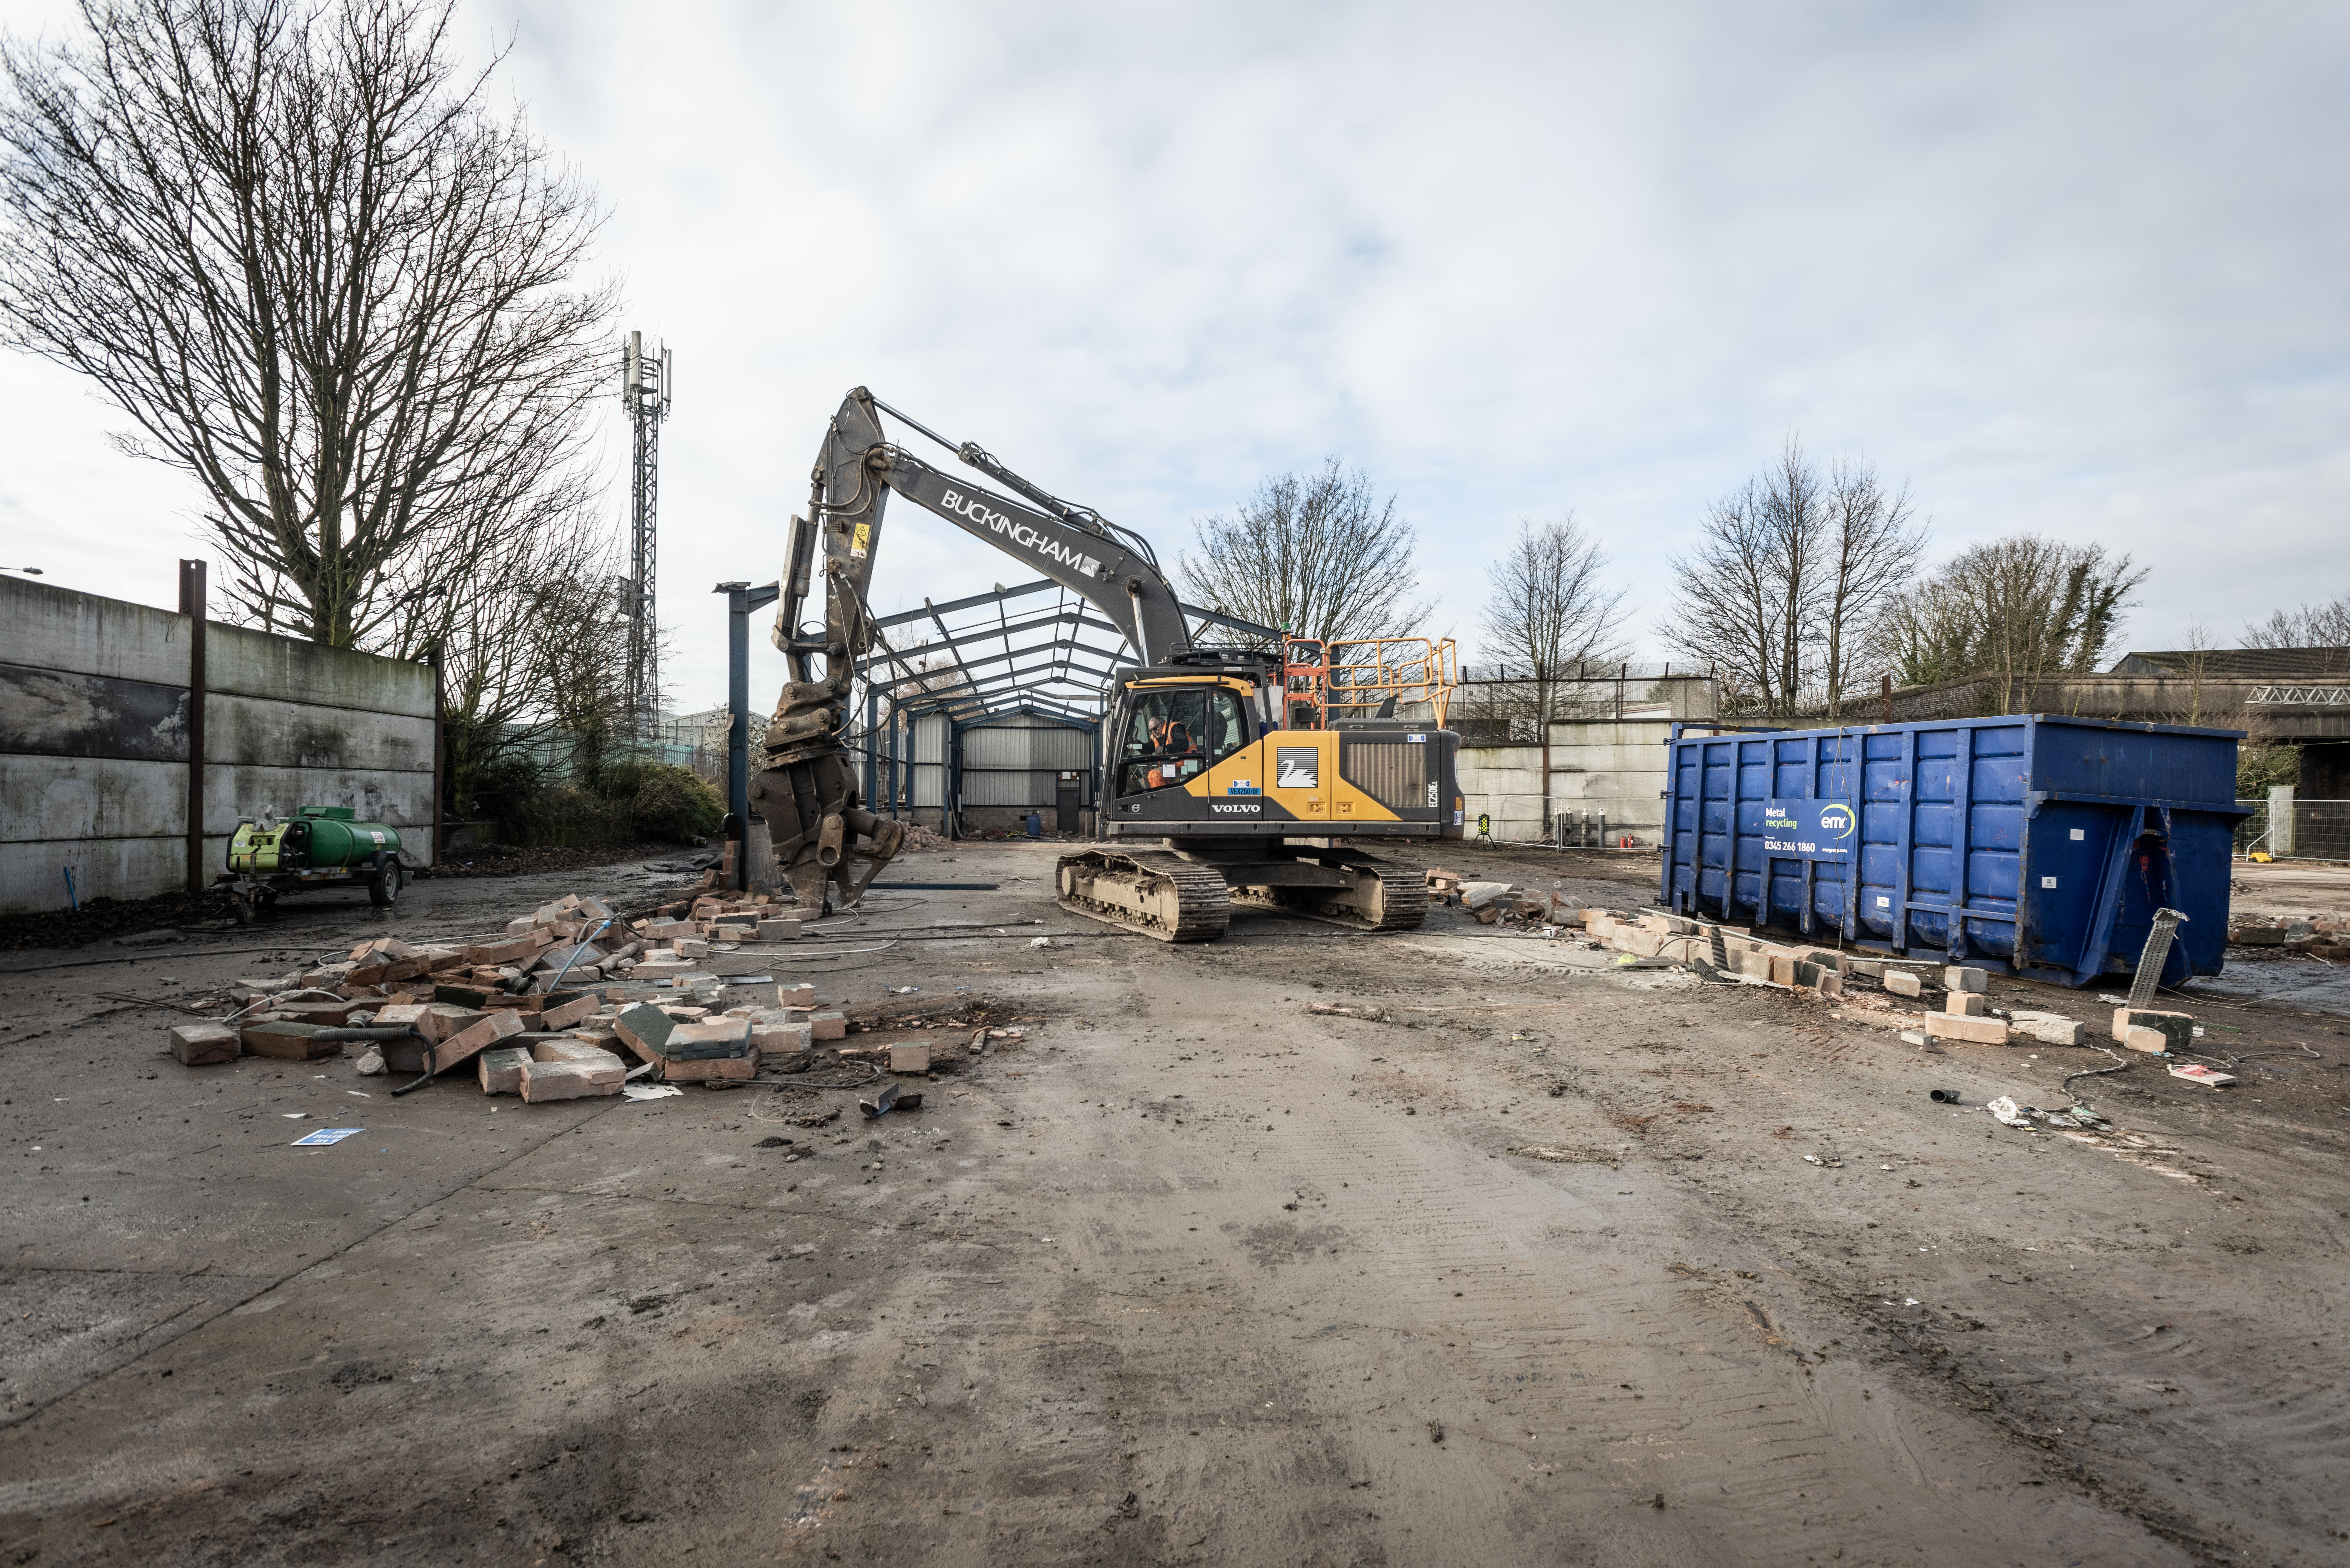 Willenhall Station site during demolition work earlier this year